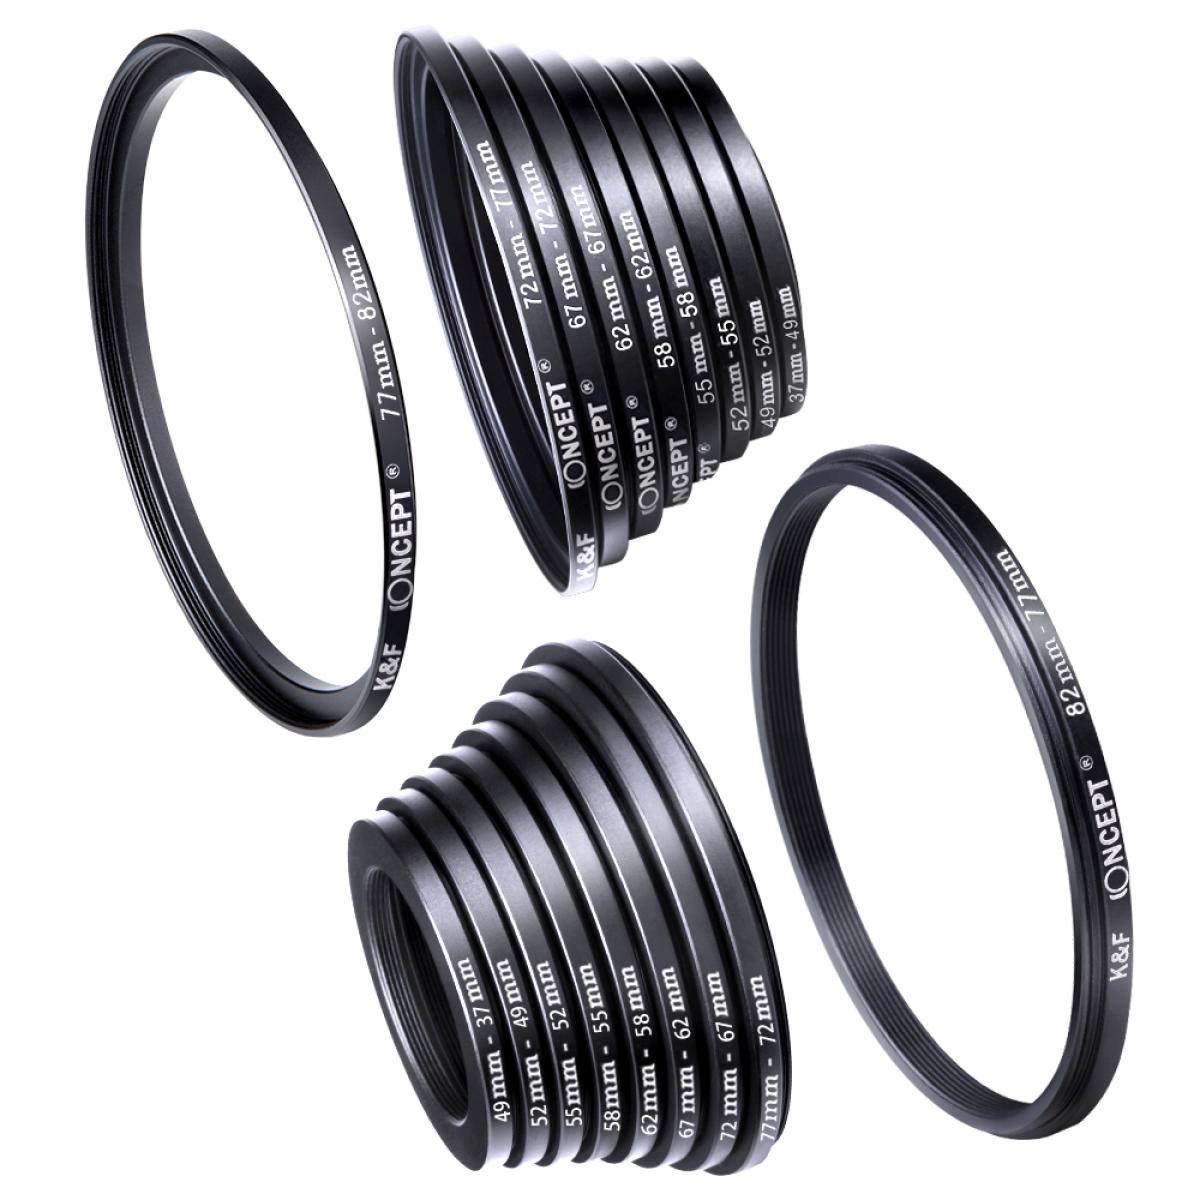 One Brand New Metal Stepping-up Filter Adapter to Fit 72mm Filters four choices 